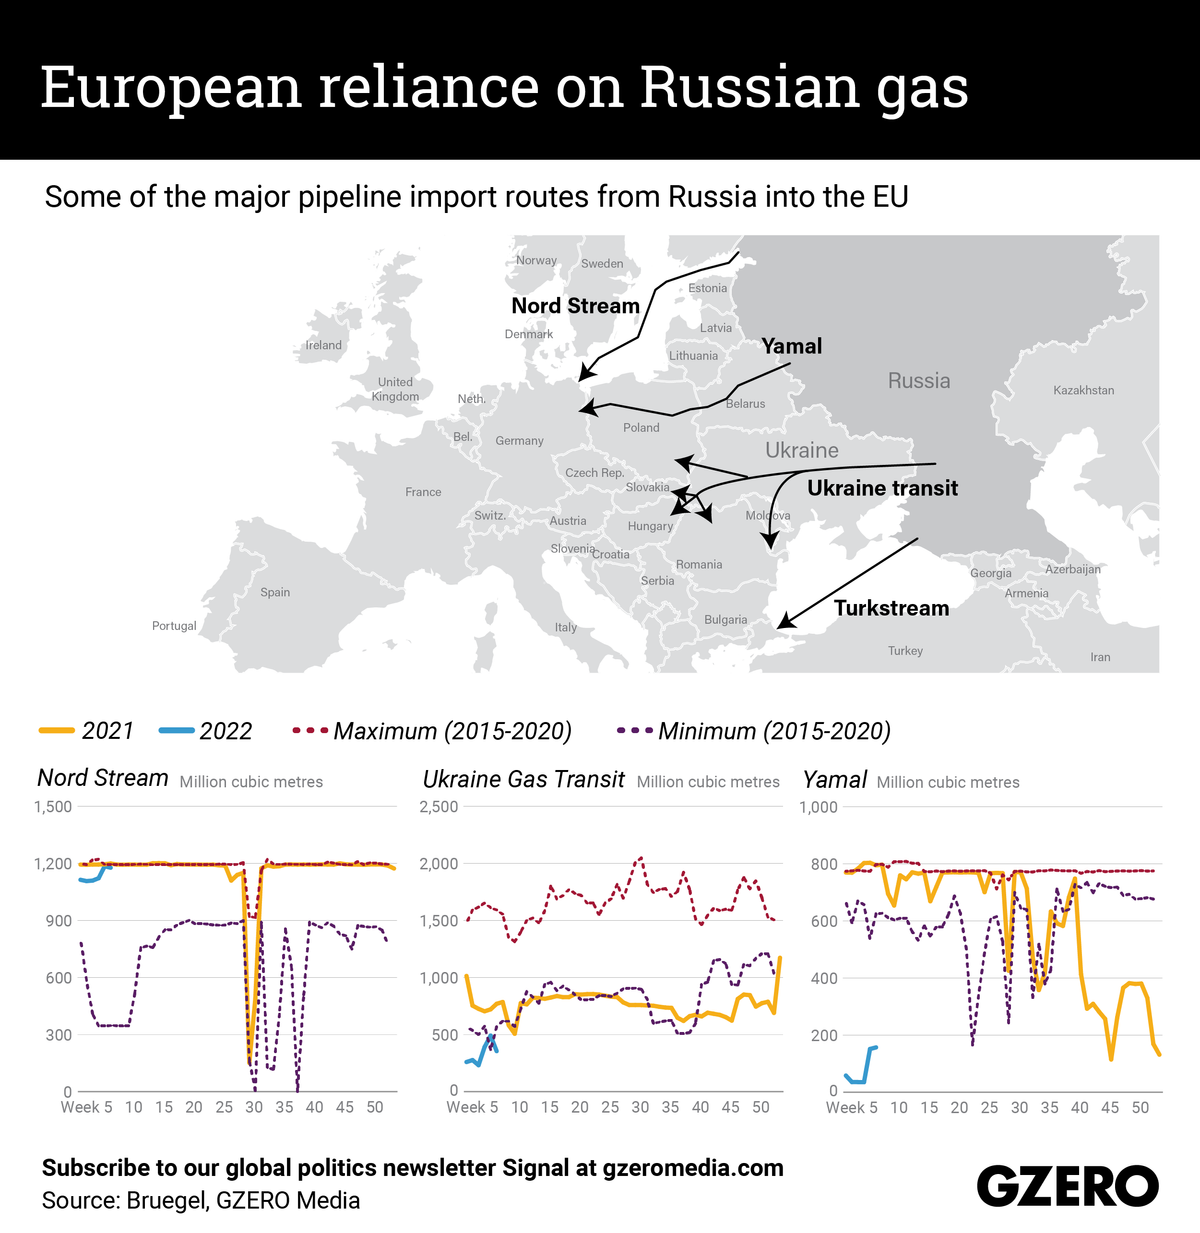 The Graphic Truth: European reliance on Russian gas